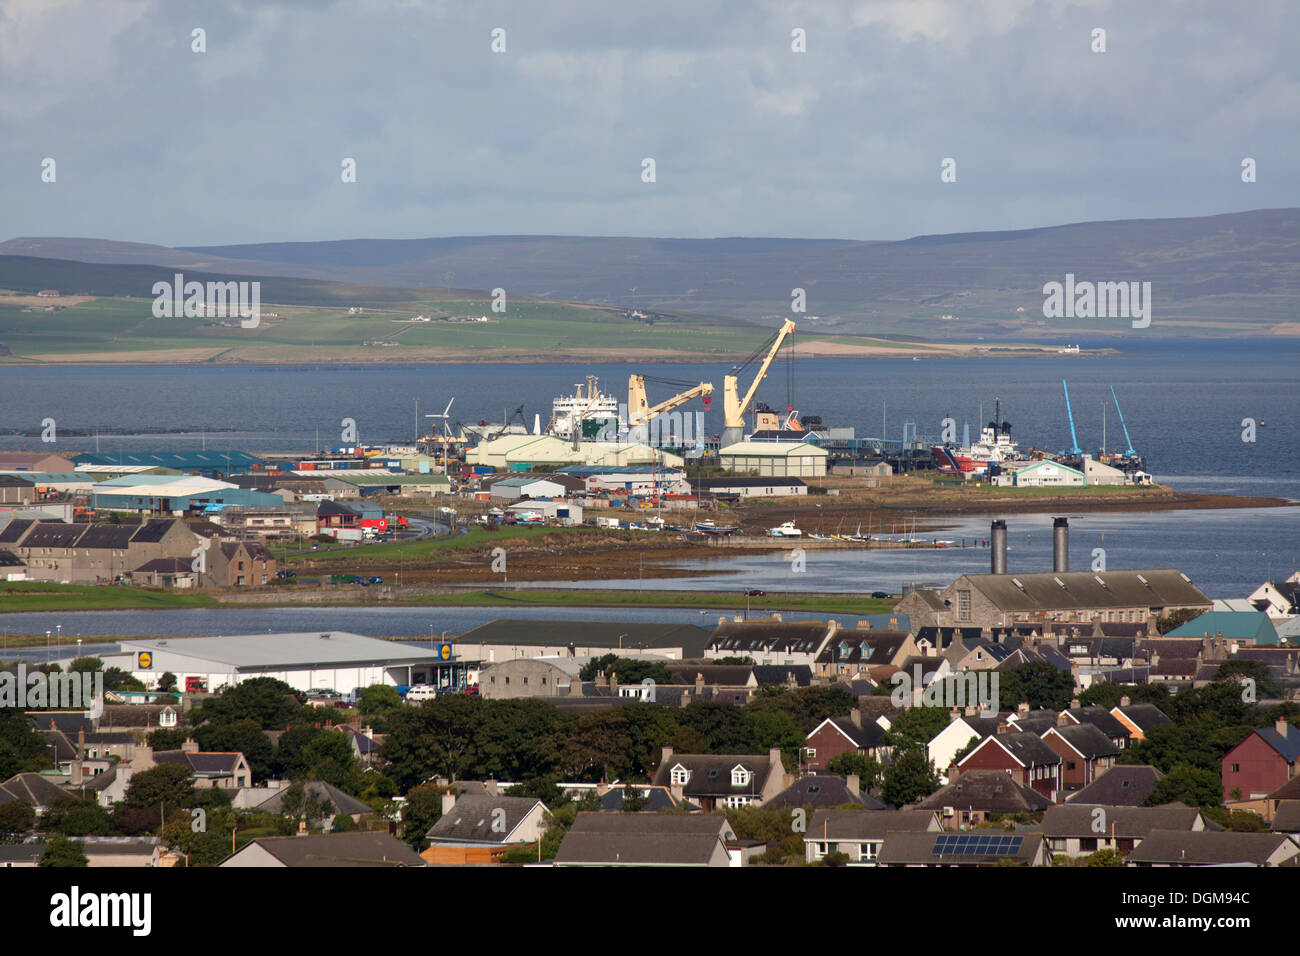 Islands of Orkney, Scotland. Elevated view over the Orkney town of Kirkwall with the Haston ferry terminal in the background. Stock Photo